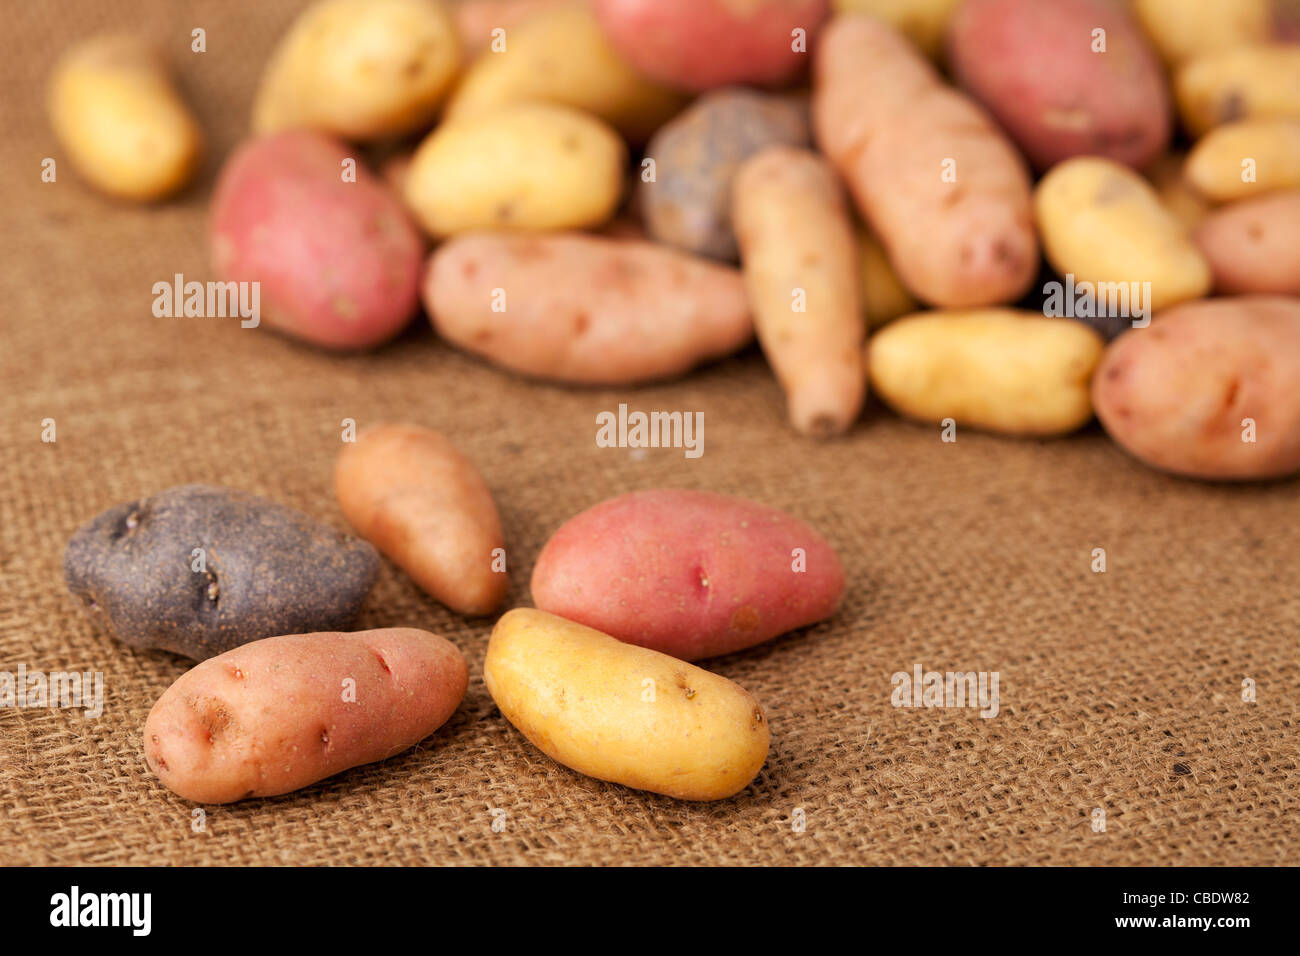 a variety of small, elongated fingerling potato organically grown in Colorado against burlap background, shallow depth of focus Stock Photo